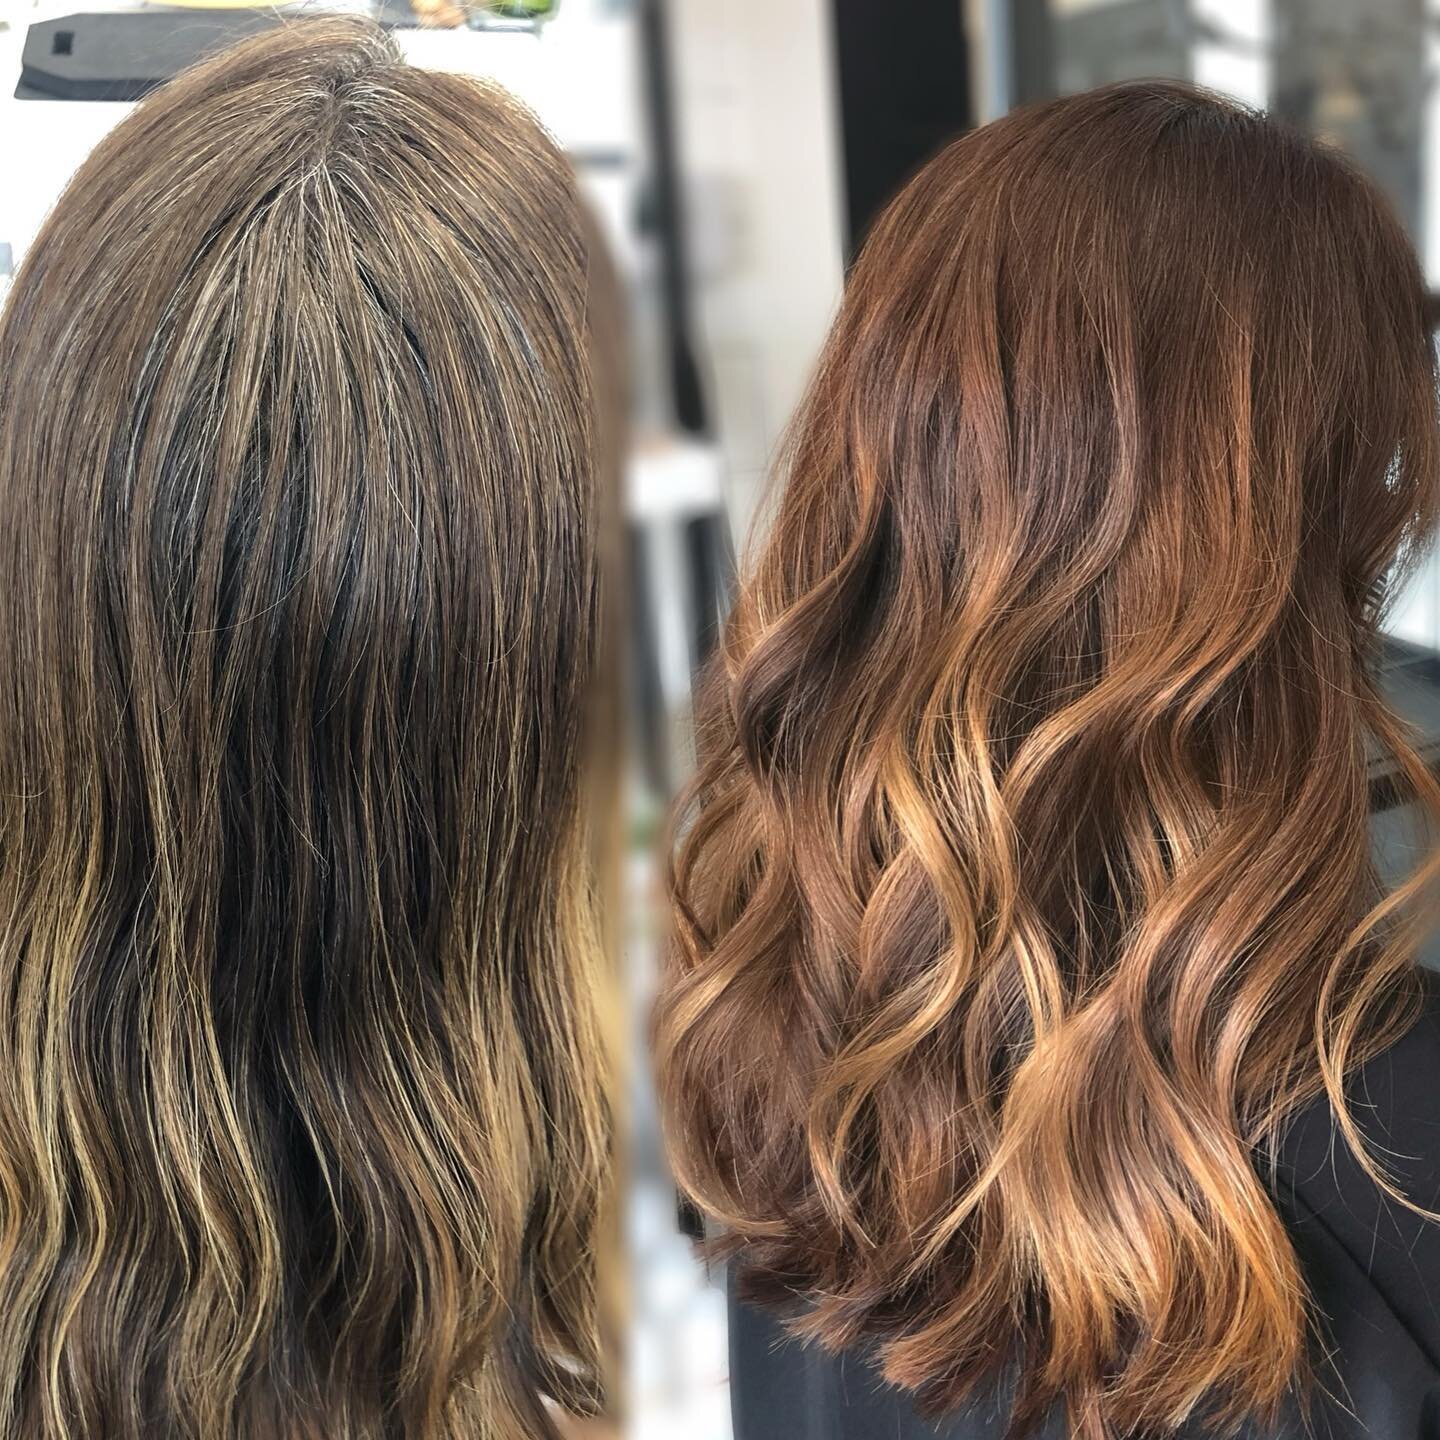 Is it too soon to say autumn glow? 🍁 💛
.
.
.
.
.
This before and after brought to you by @brooke_atblend 😍
.
.
.
.

.

.

#behindthechair #modersalon #americansalon #beautylaunchpad #bestofbalayage #mastersofbalayage #citiesbesthairartists #balaya